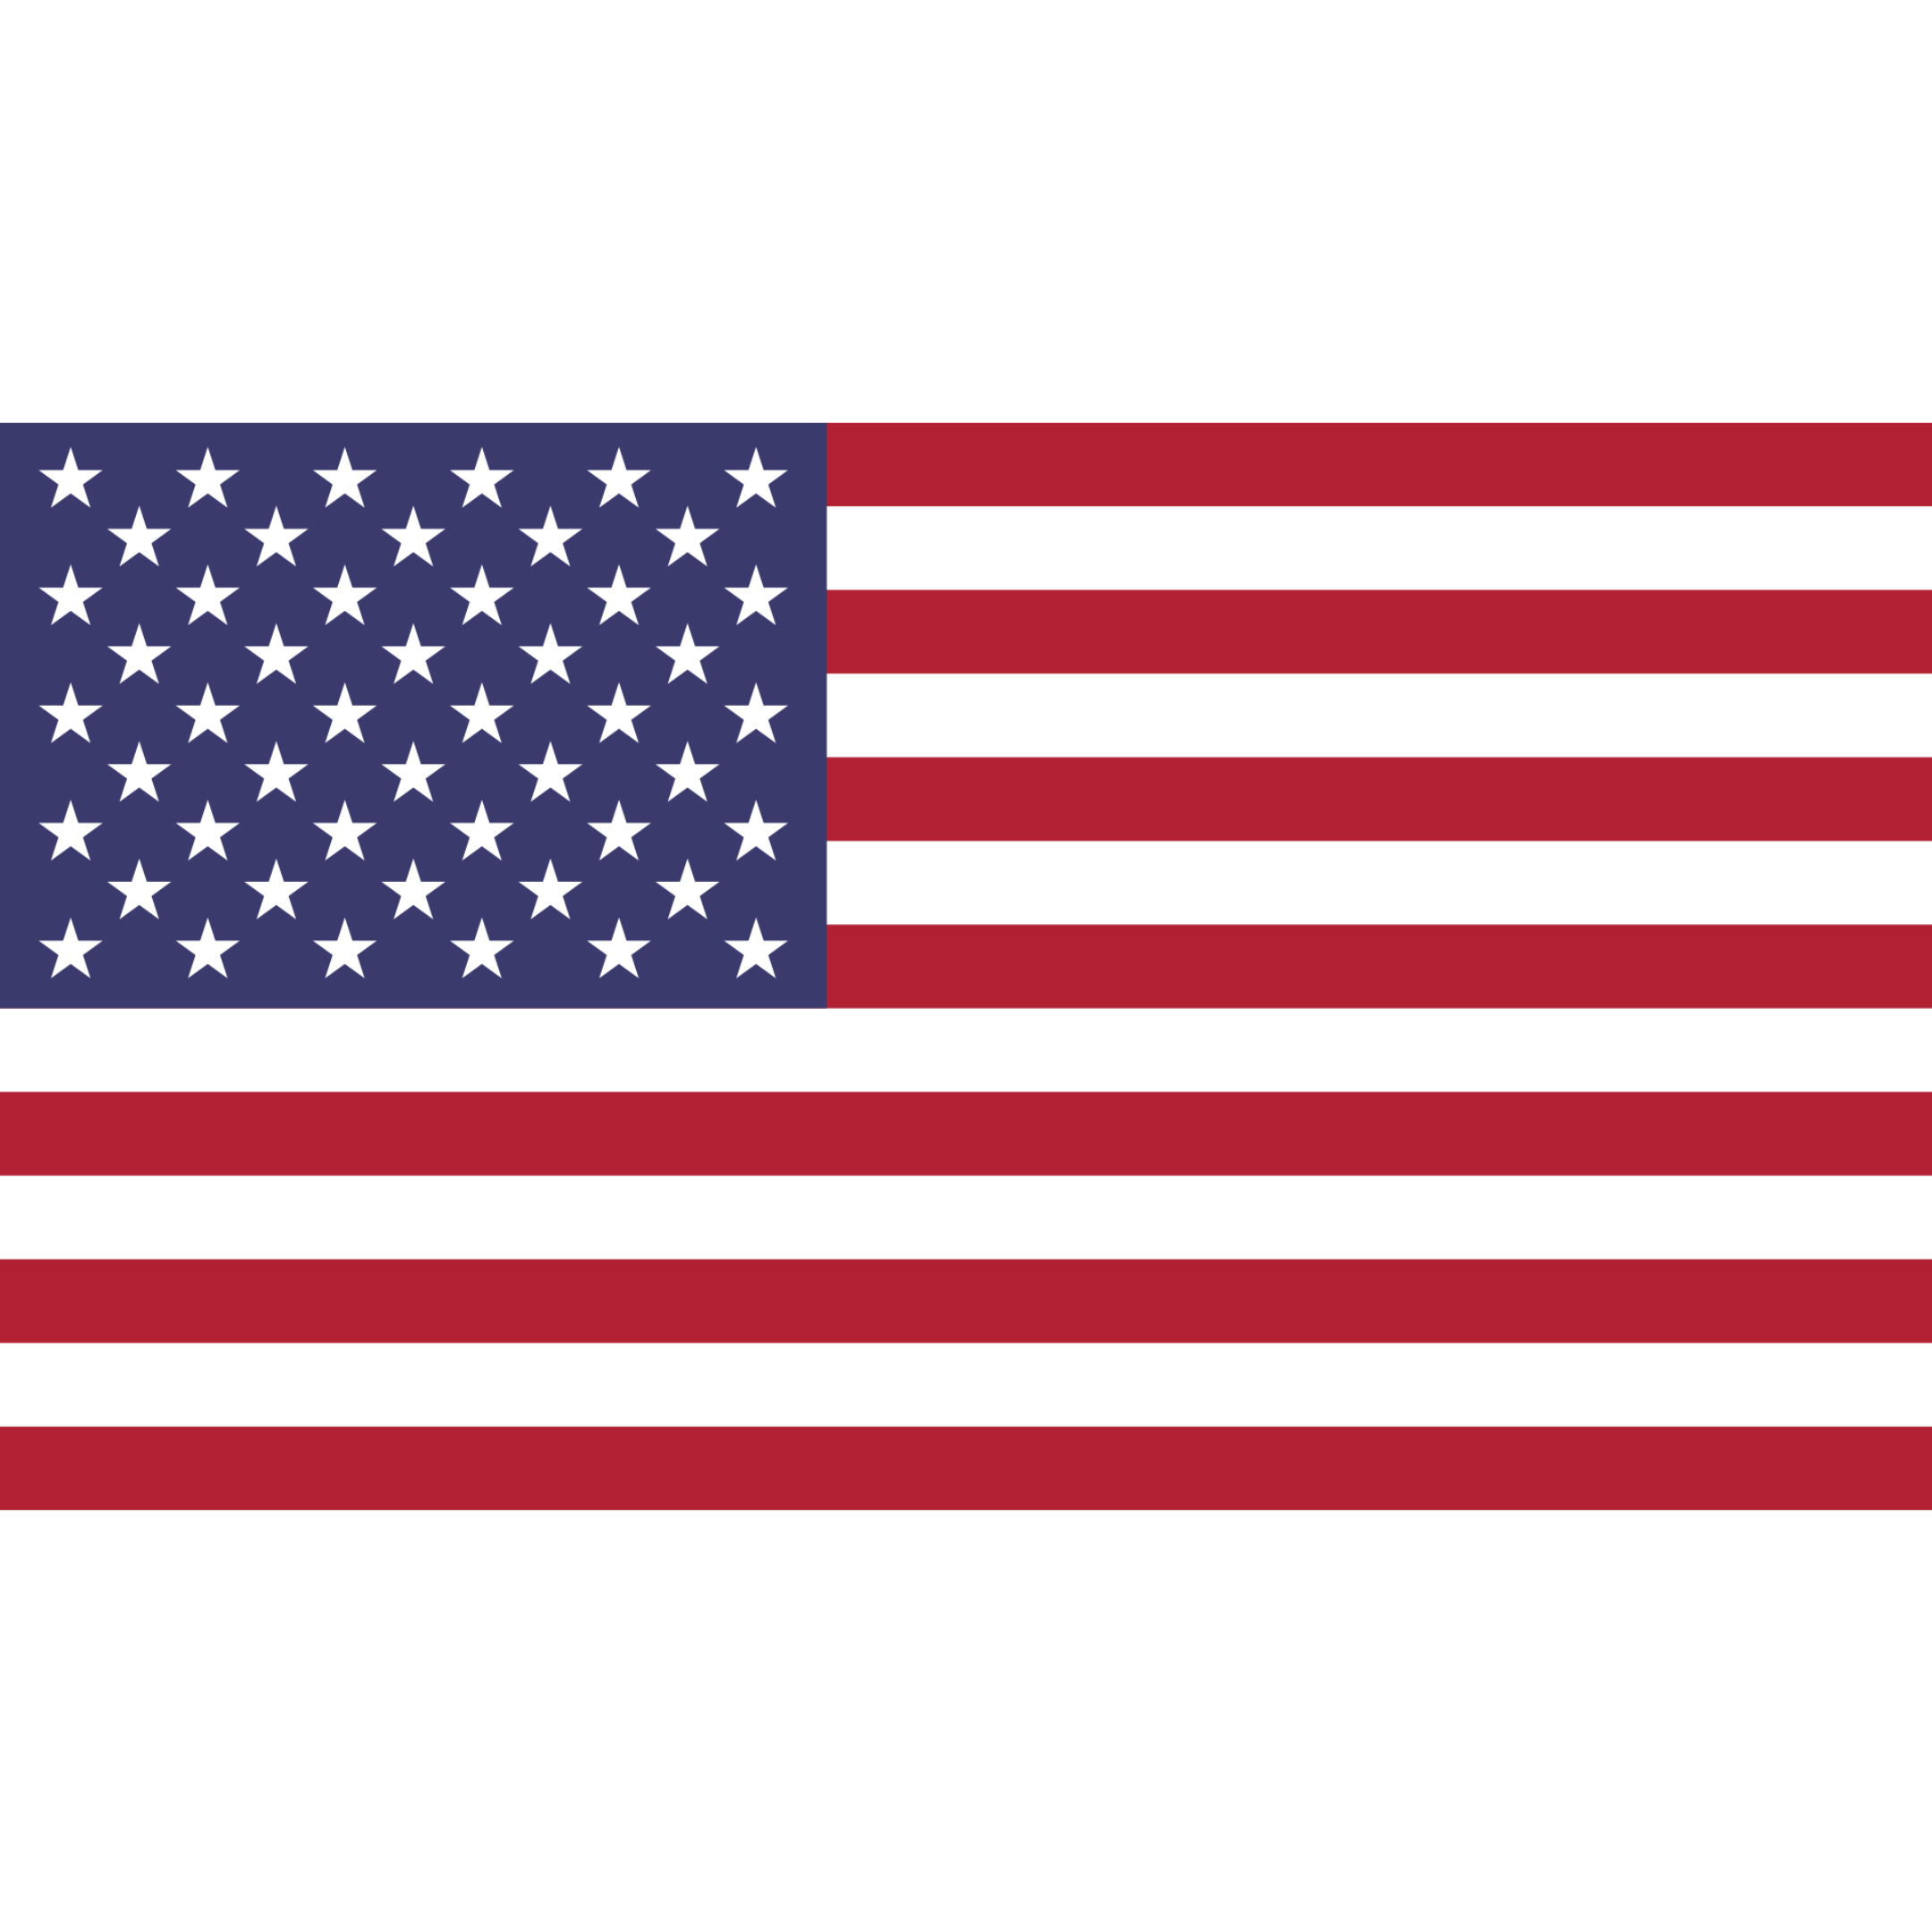 The USA flag has thirteen horizontal red and white stripes and a blue rectangle in the top left corner, with fifty white stars.